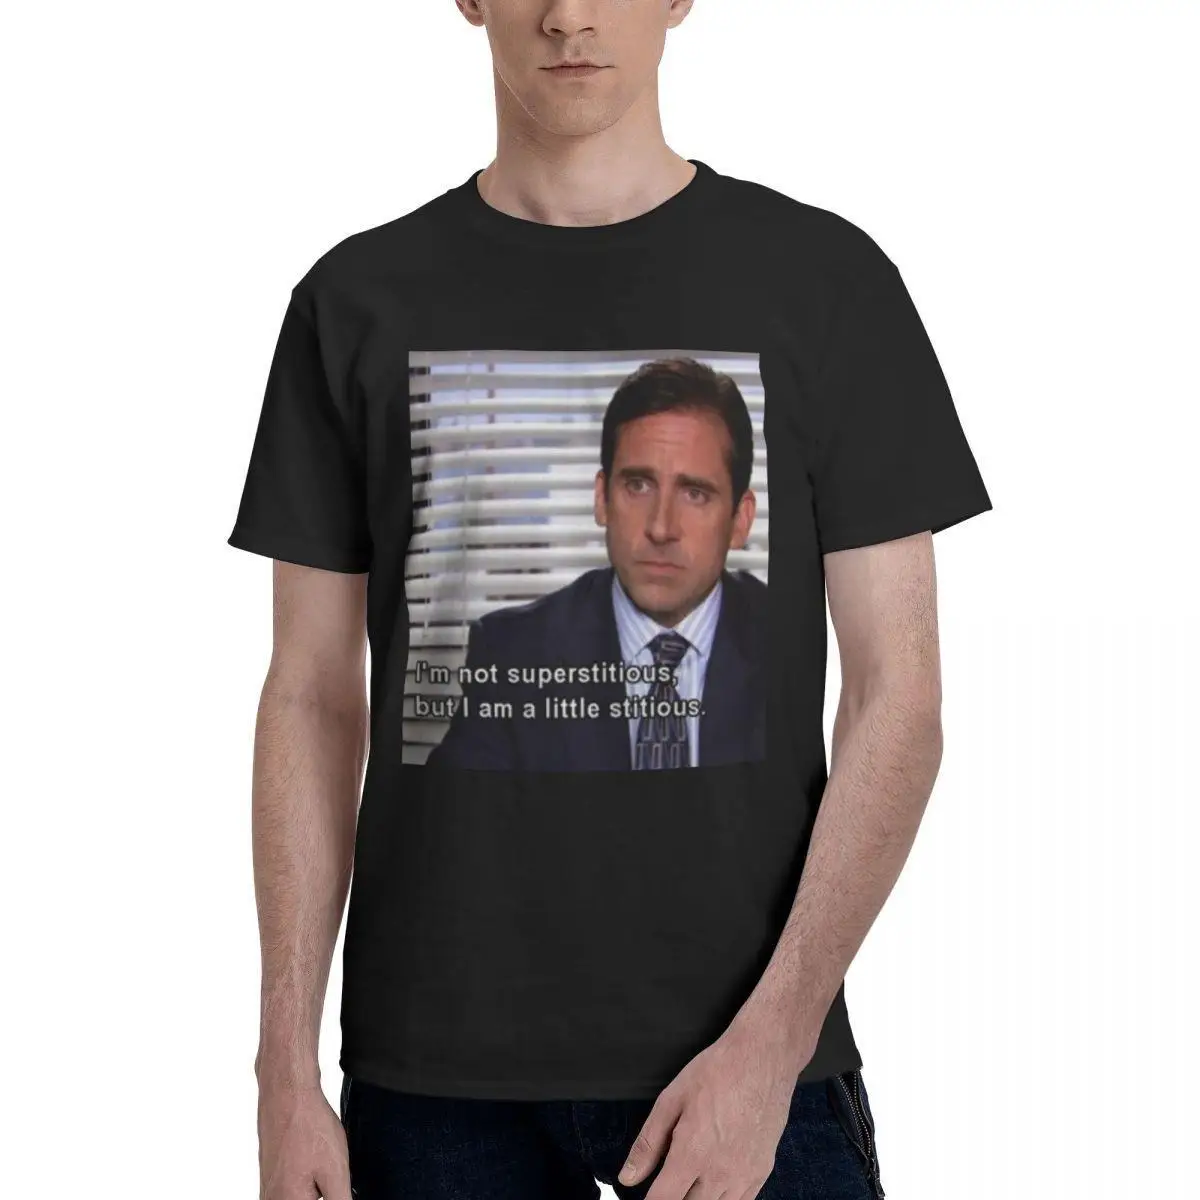 Creative The Office Michael Scott TV T-Shirt for Men Round Neck Pure Cotton T Shirts Short Sleeve Tees Printing Tops